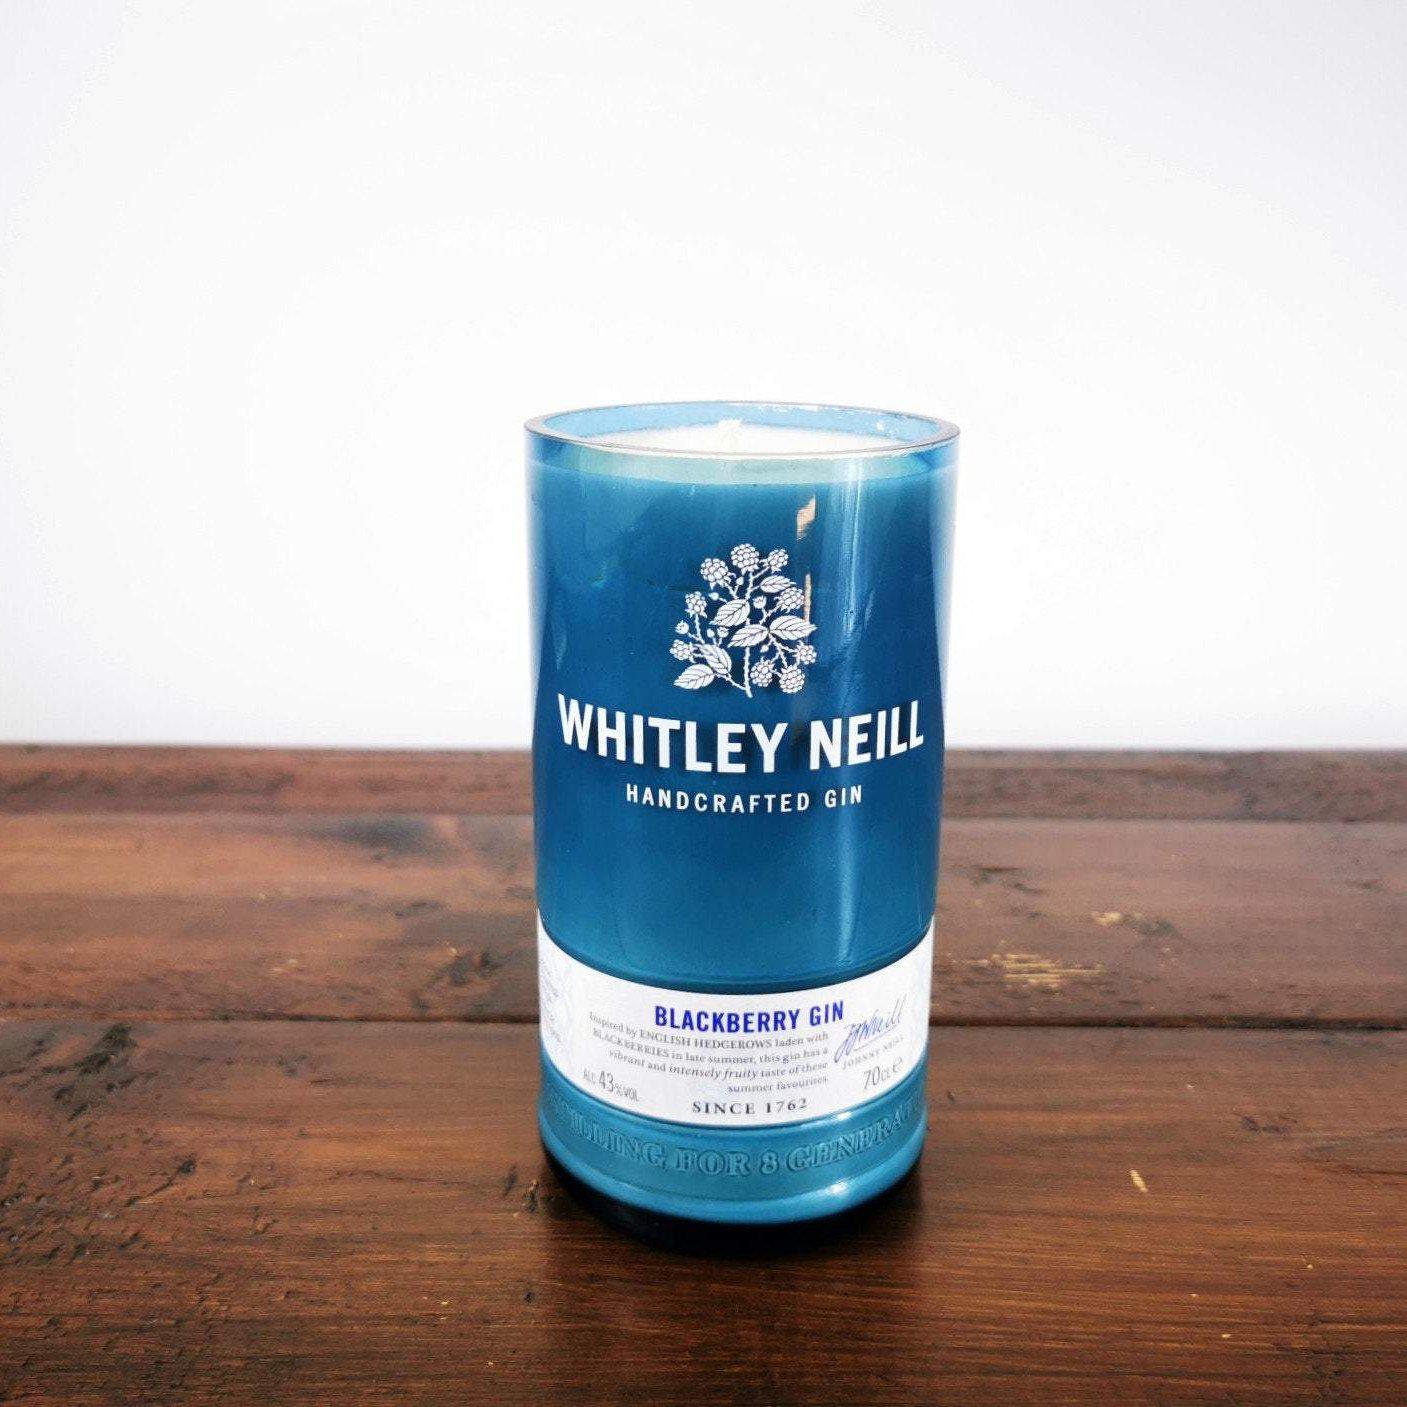 Whitley Neill Blackberry Gin Bottle Candle Gin Bottle Candles Adhock Homeware